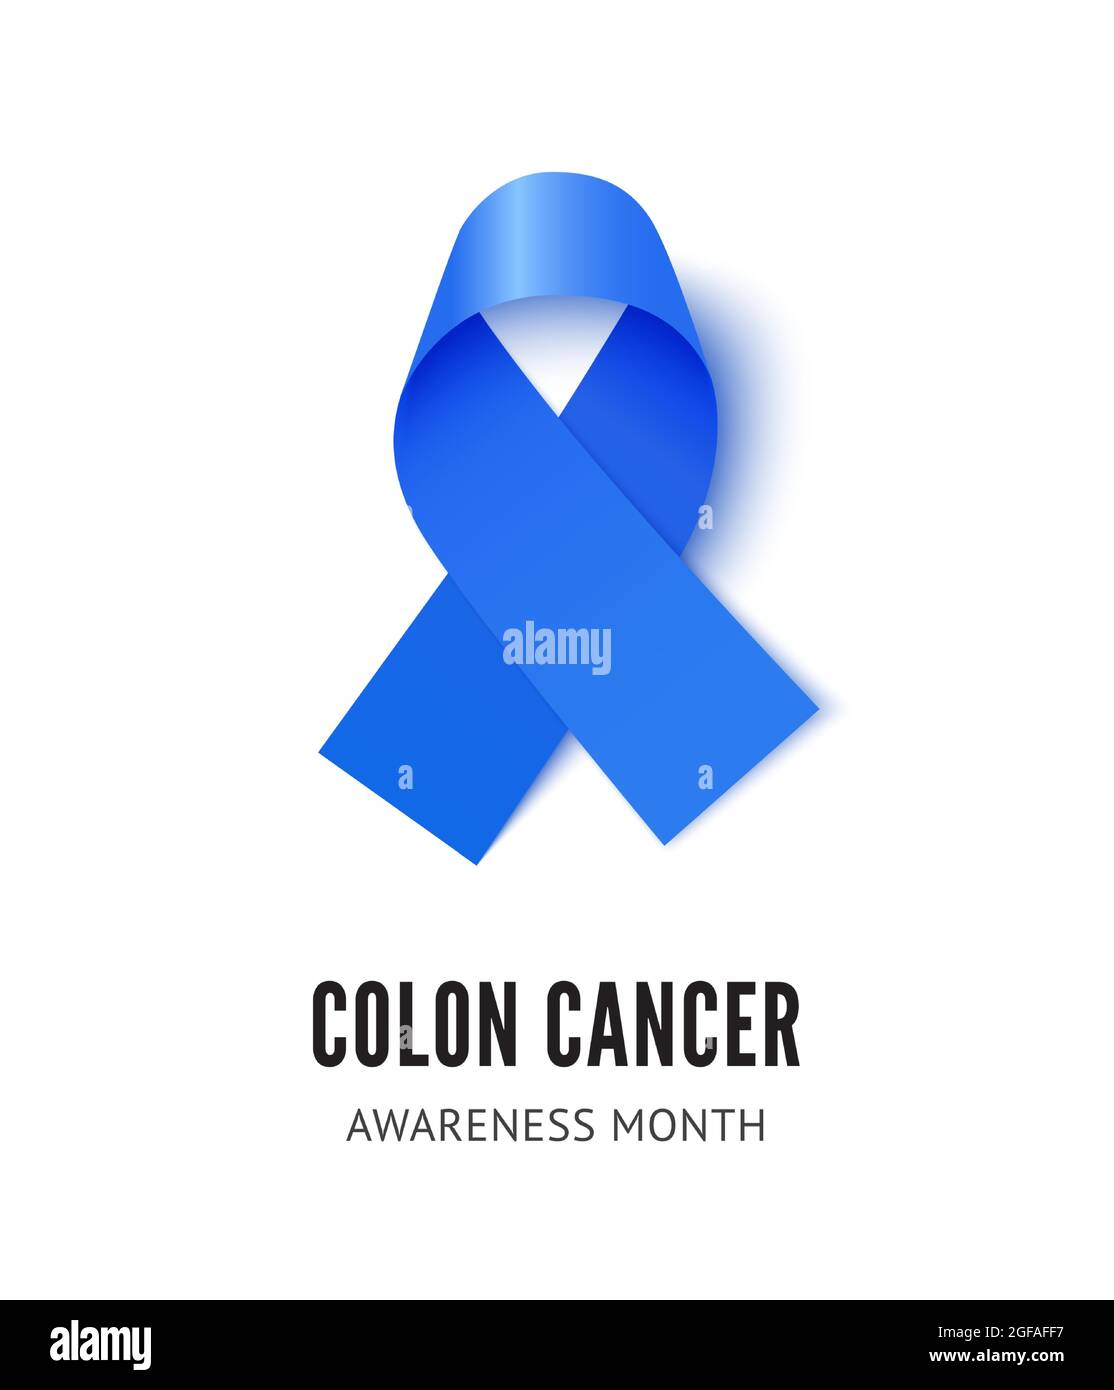 Colon Cancer Awareness Ribbon Vector Illustration Isolated On White